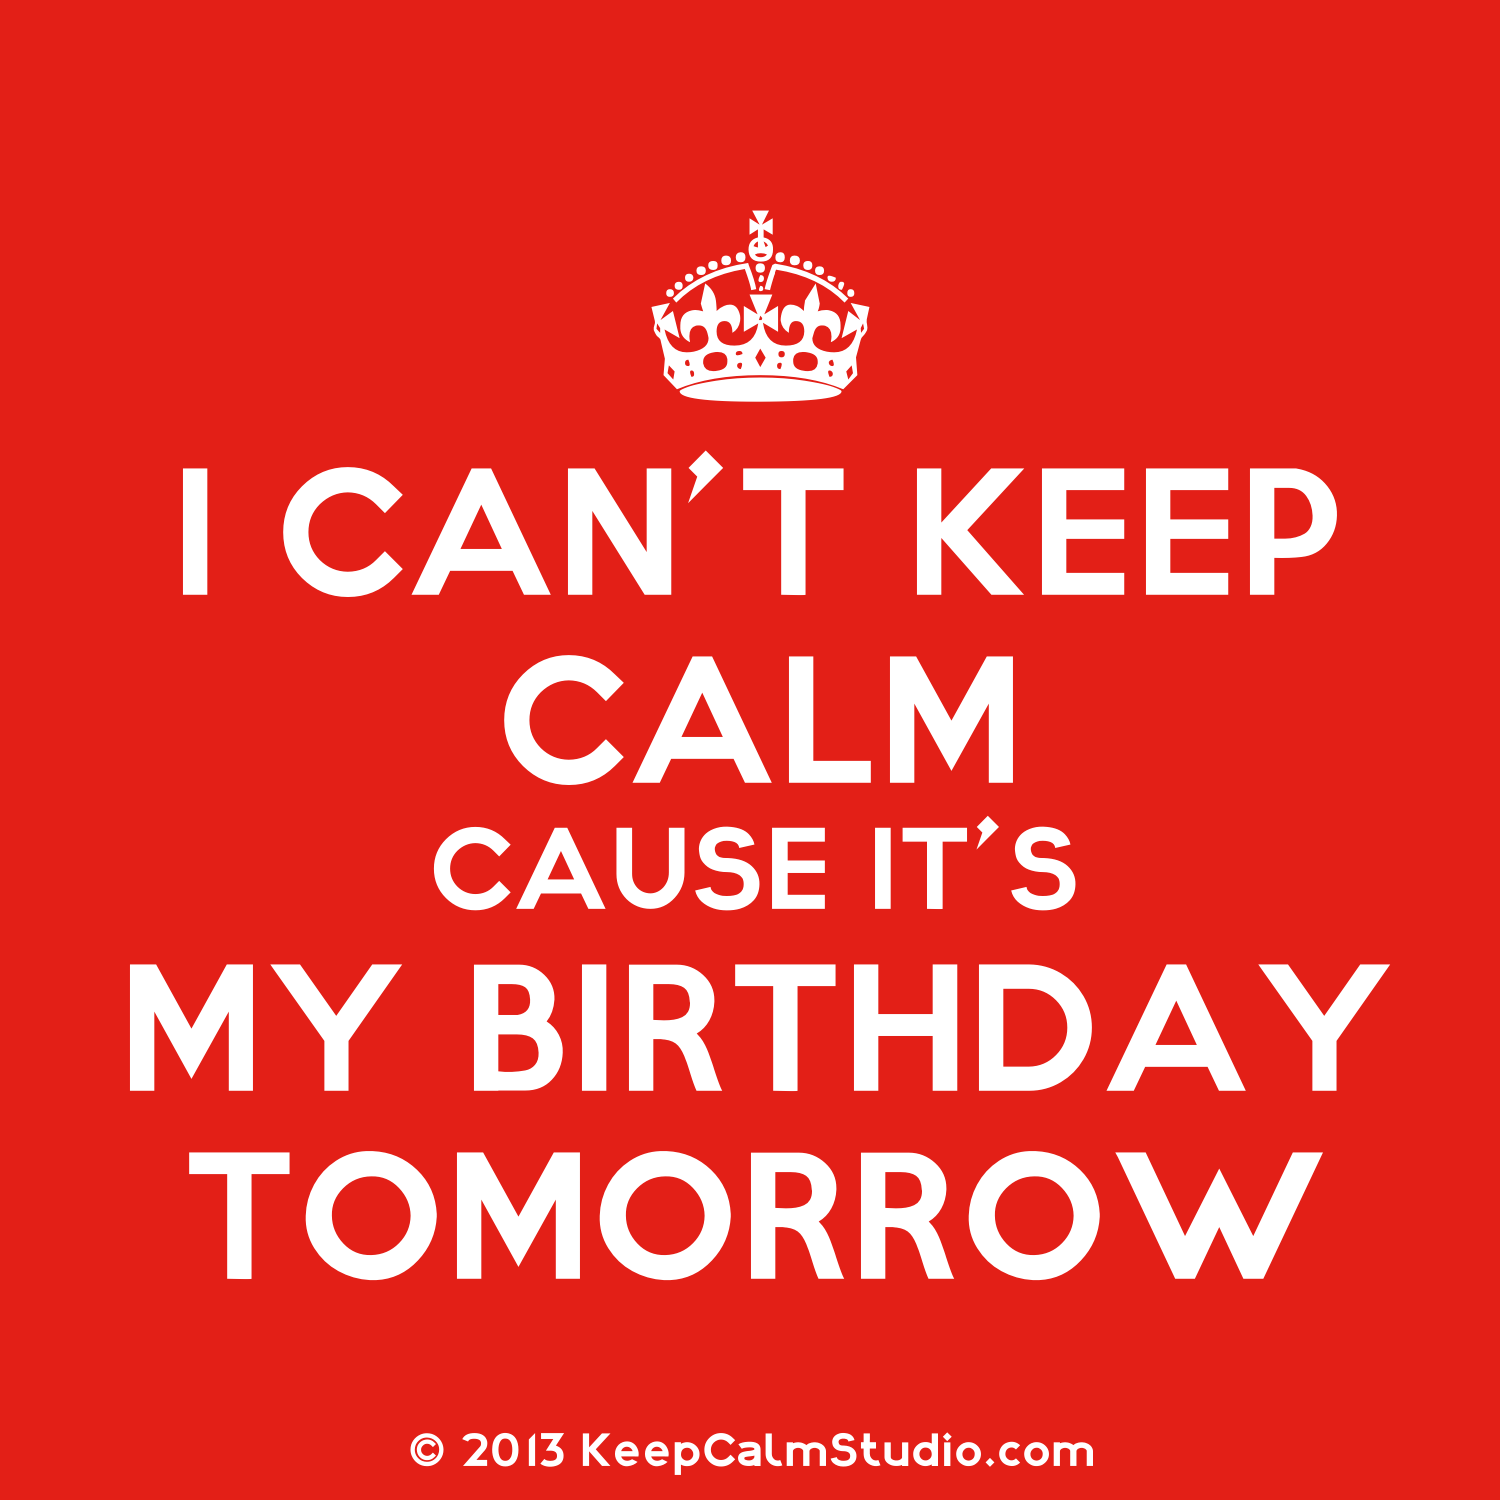 keep calm its my birthday quotes